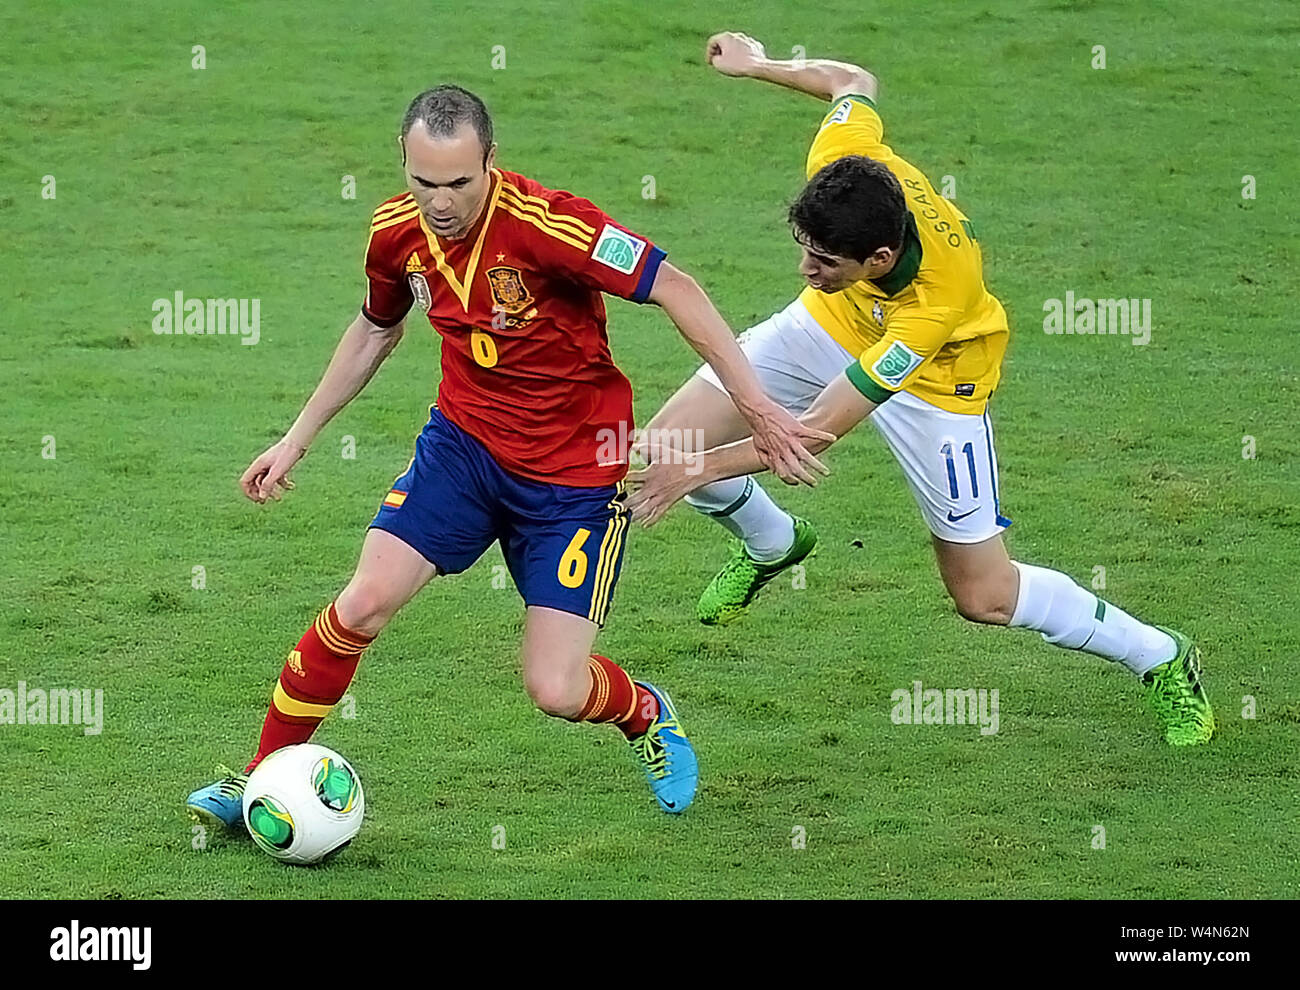 Football player Iniesta, during the Brazil-Spain game for the Confederations Cup at the Maracanã stadium in Rio de Janeiro, Brazil Stock Photo